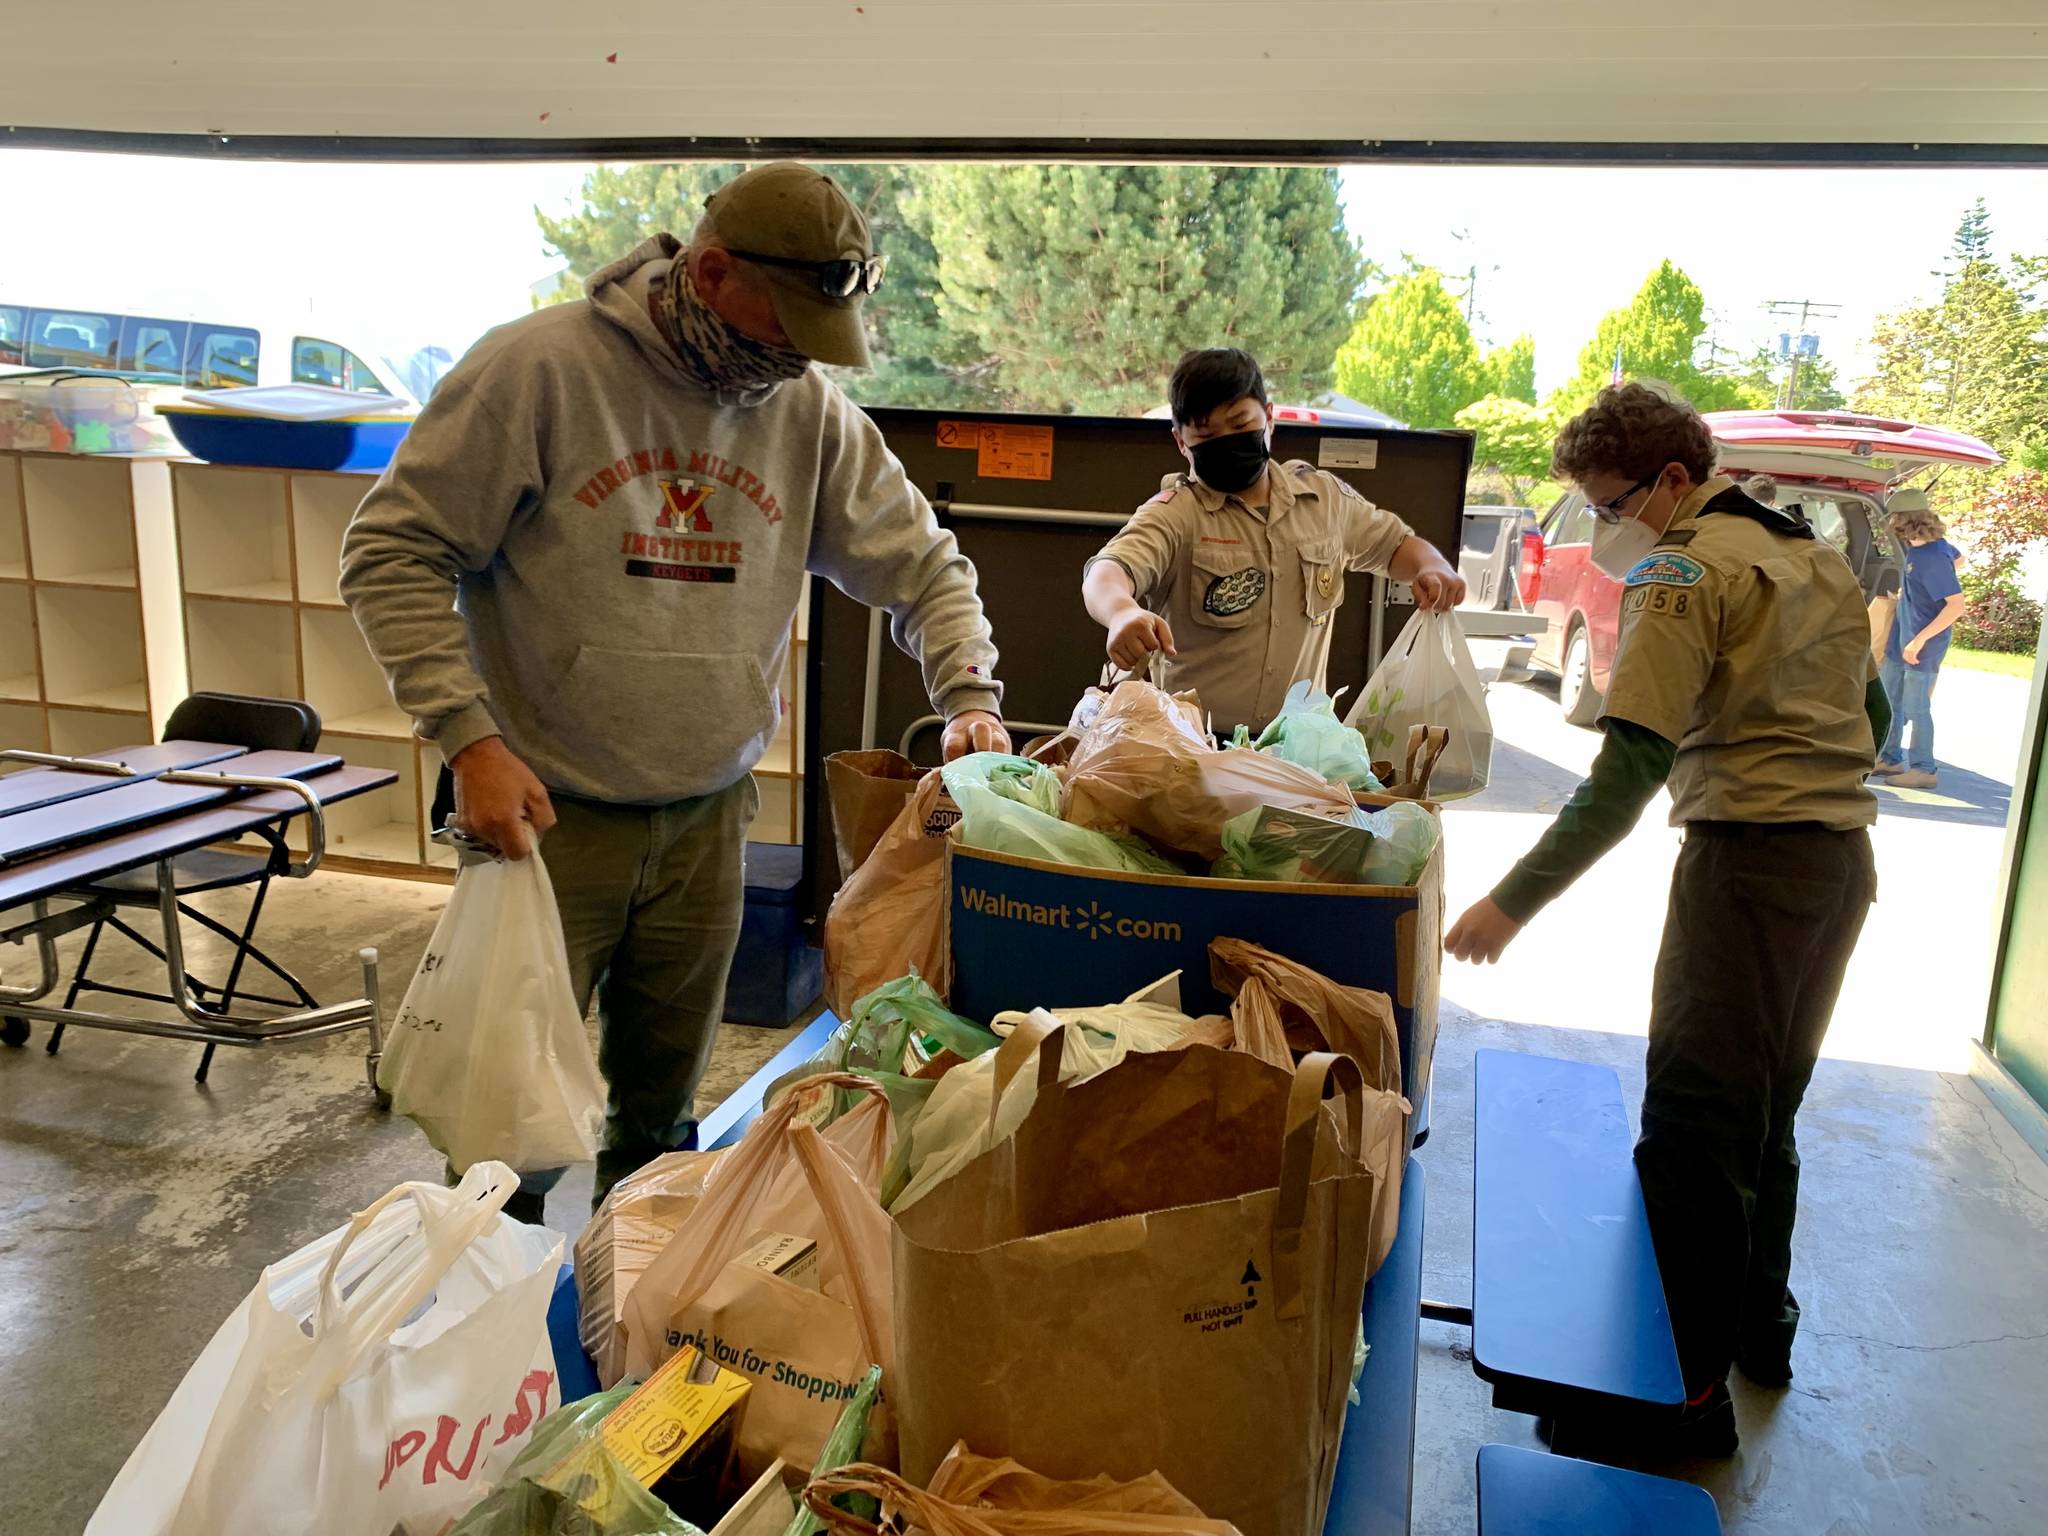 Photo courtesy Preston Howard
Scouts BSA Troop 4058 and Coupeville Cub Scout Pack 4058 collected over 1,000 items of food from the community to donate to the Gifts from the Heart Food Bank in Coupeville.